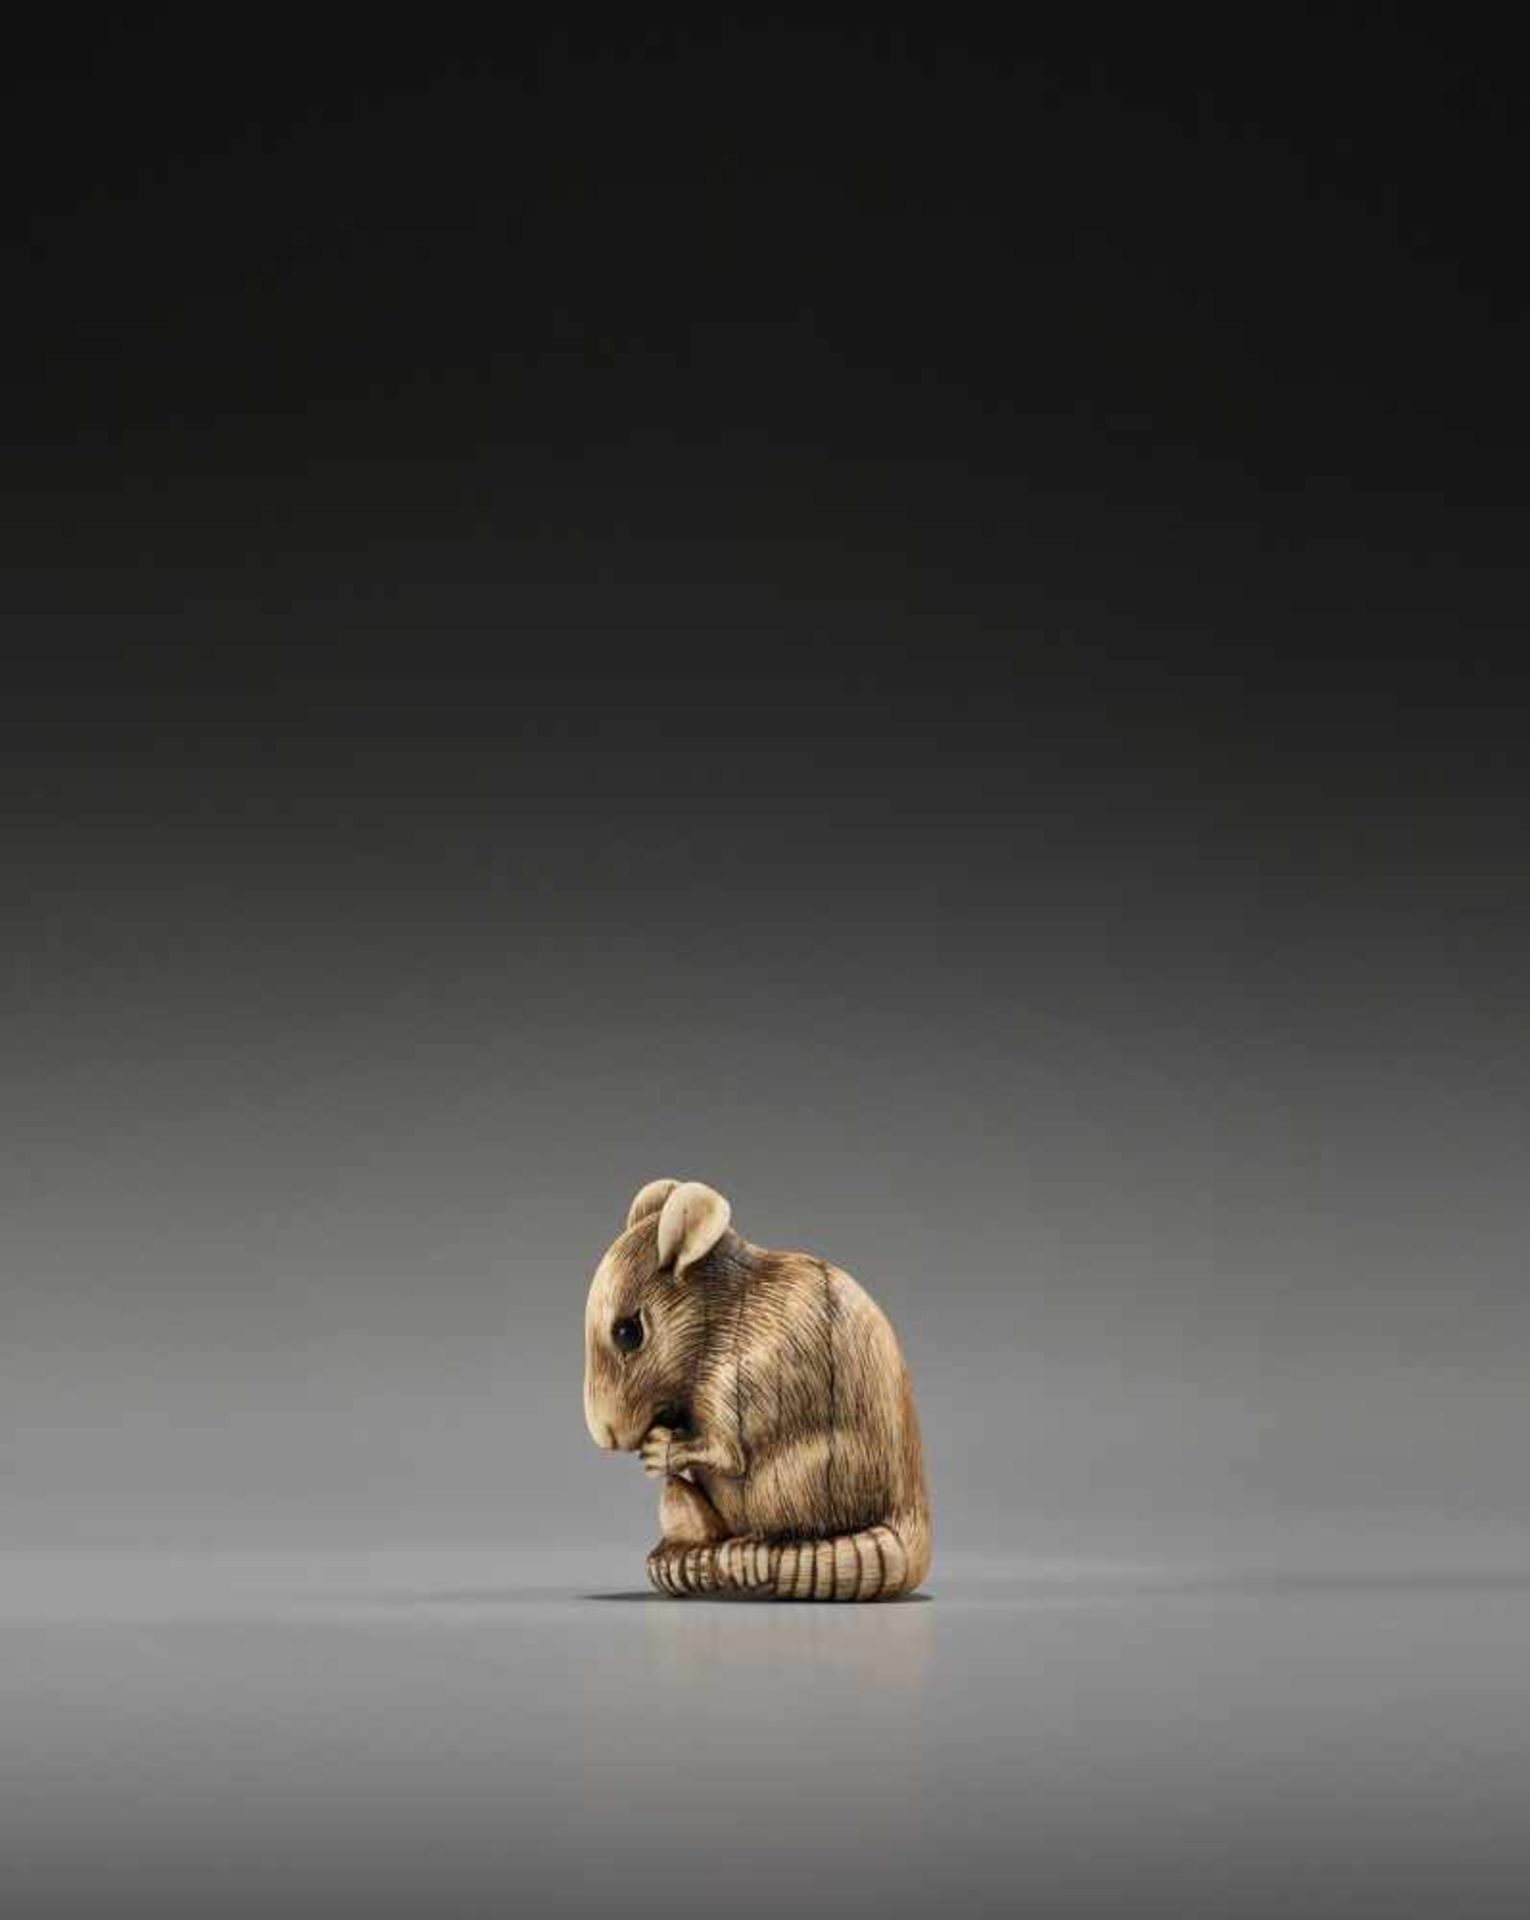 A POWERFUL KYOTO SCHOOL IVORY NETSUKE OF A RAT WITH A BEAN POD - Image 6 of 11